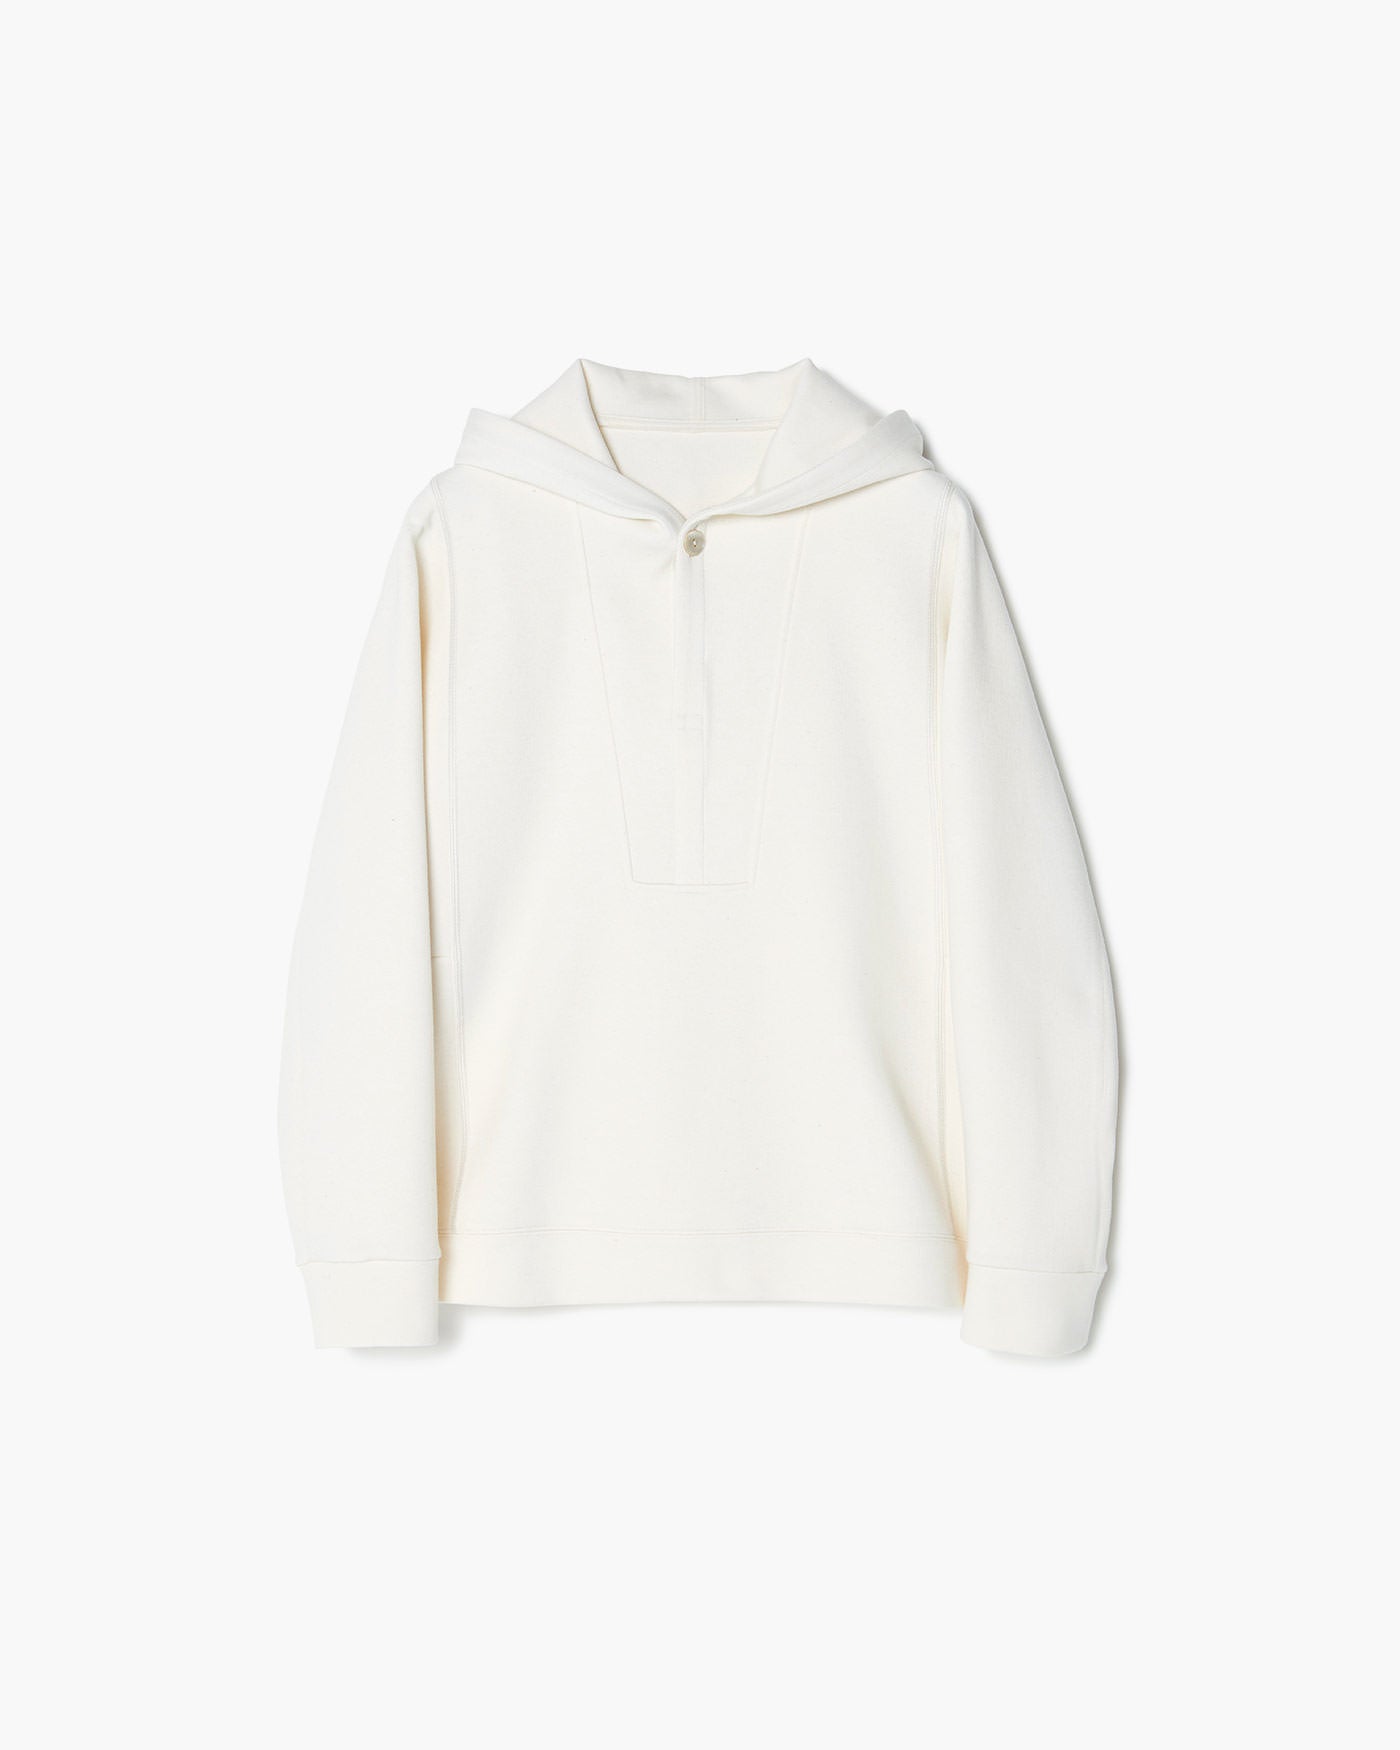 MODIFIED SLEEVE HOODED PULLOVER